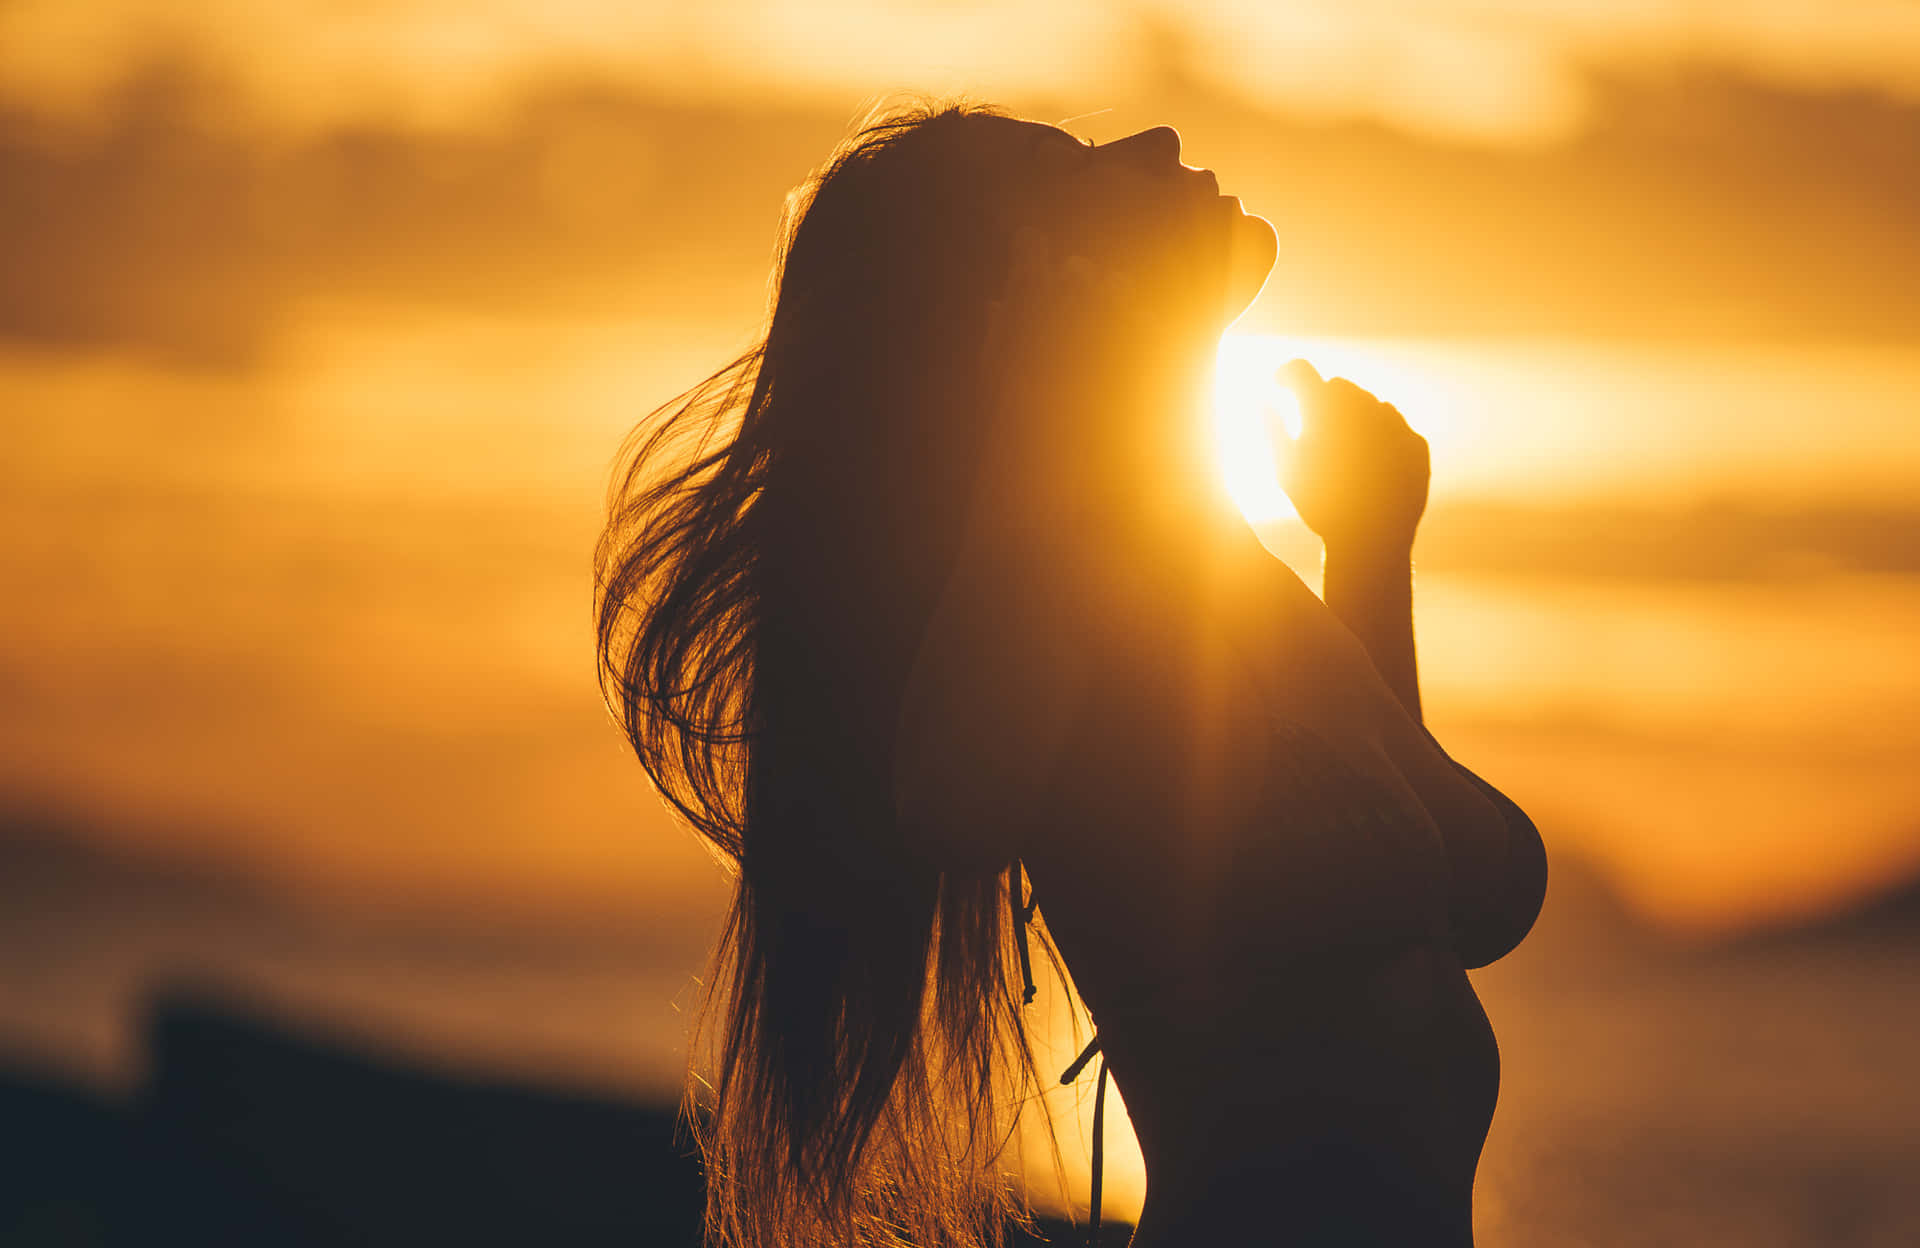 A Woman With Long Hair Standing In The Sun